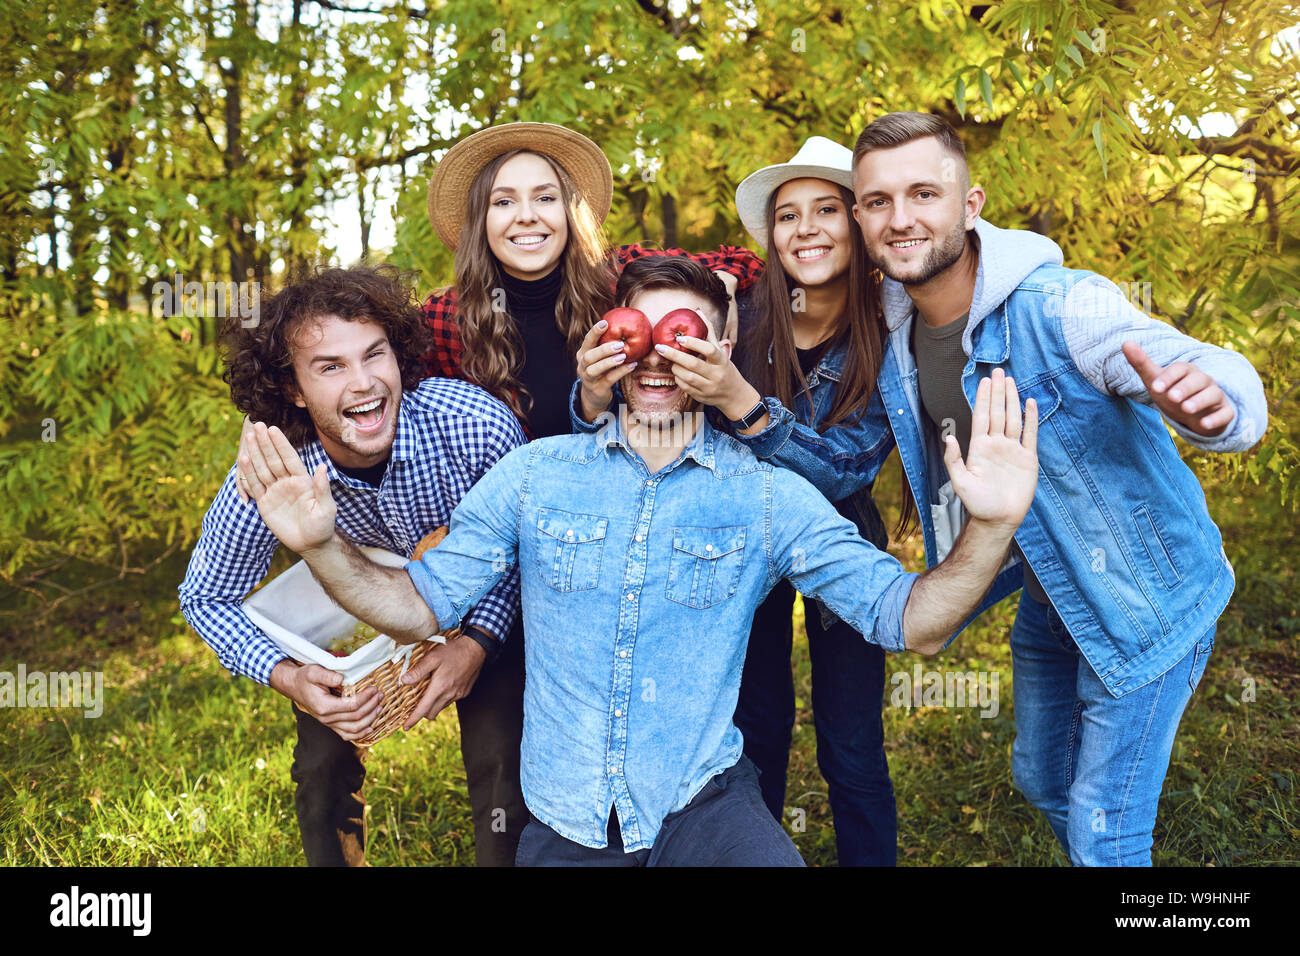 Cheerful friends are laughing in the park. Stock Photo